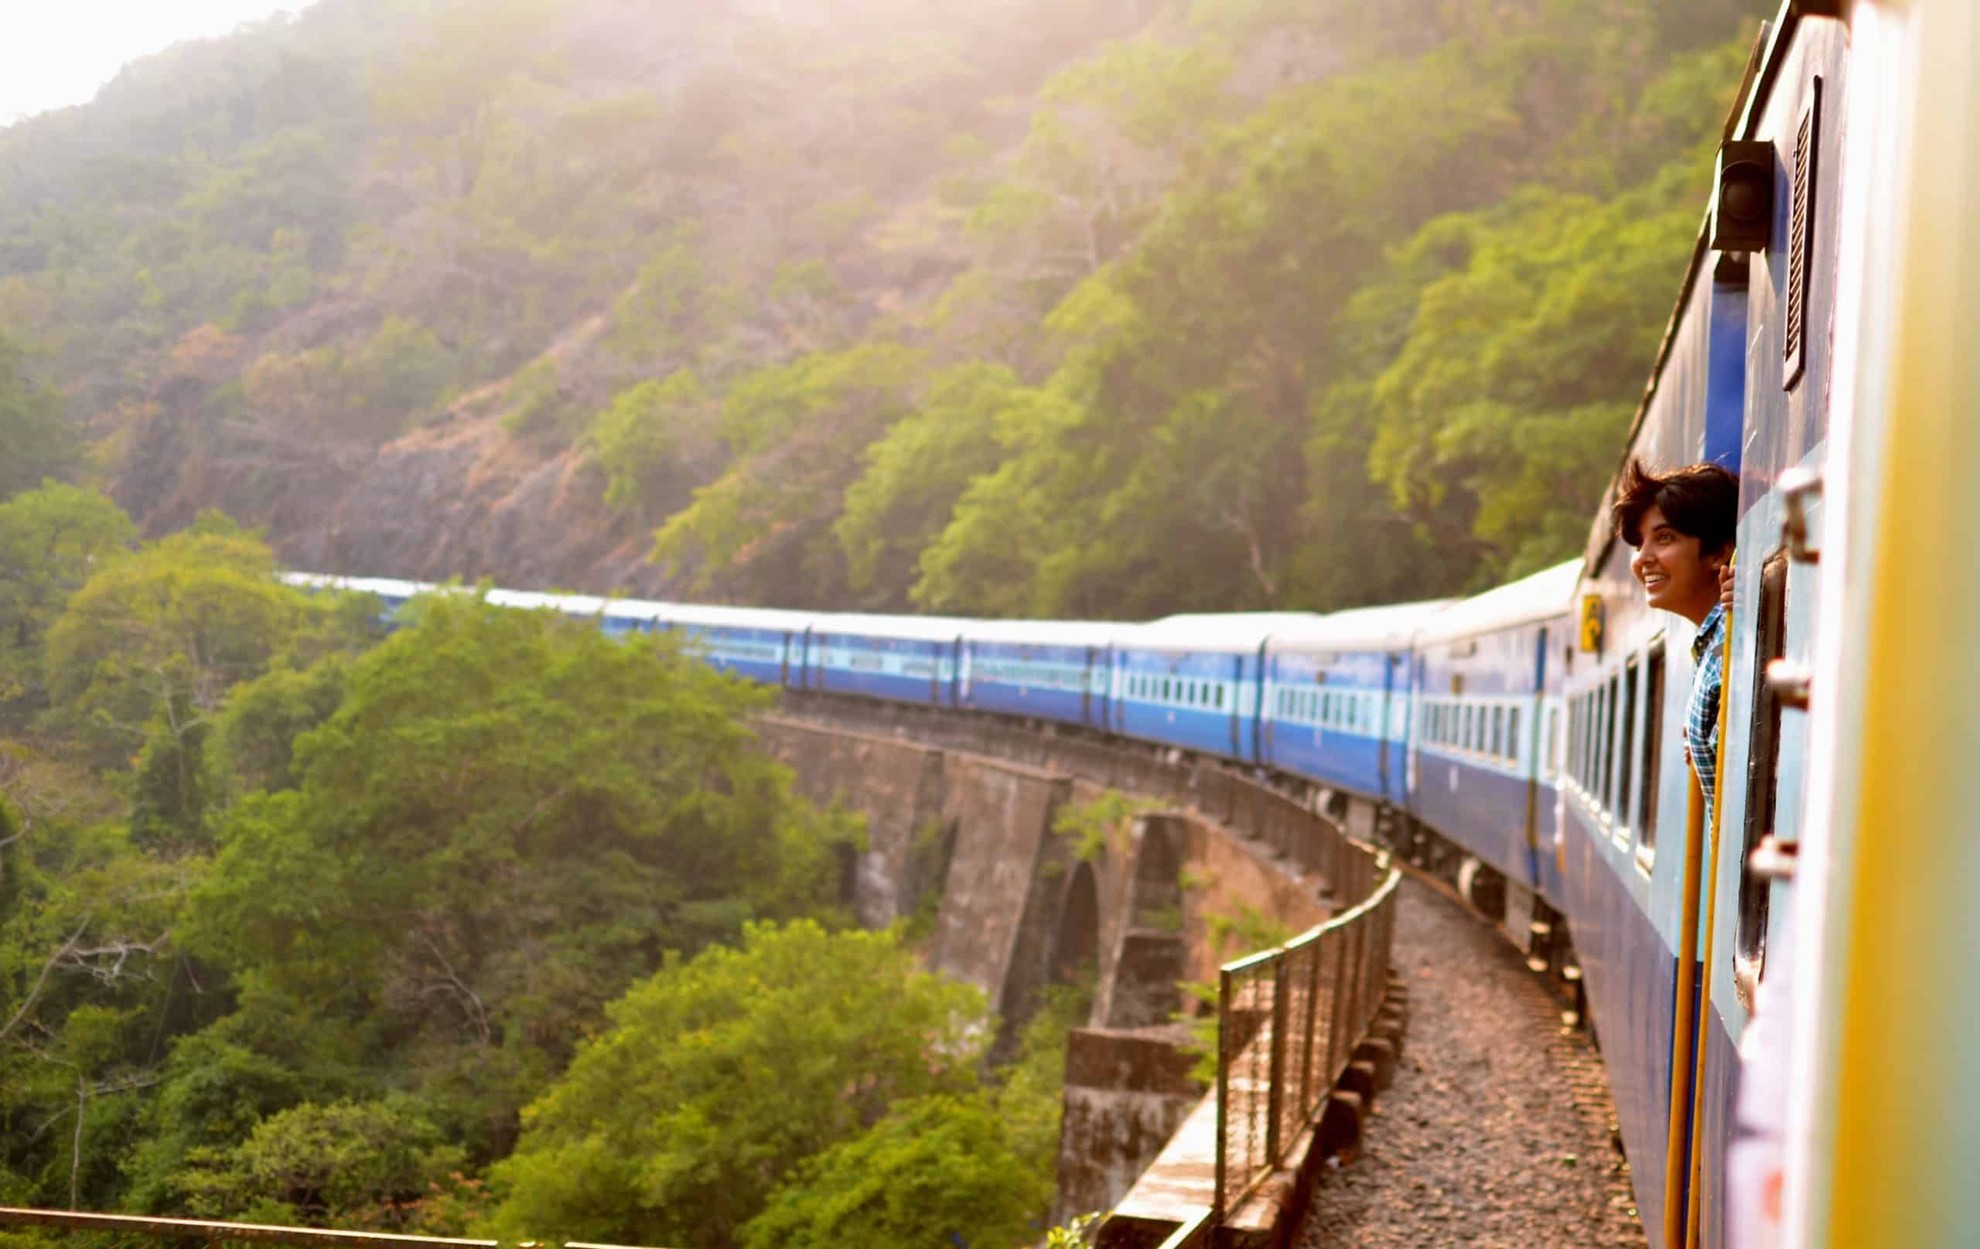 Train and nature in India